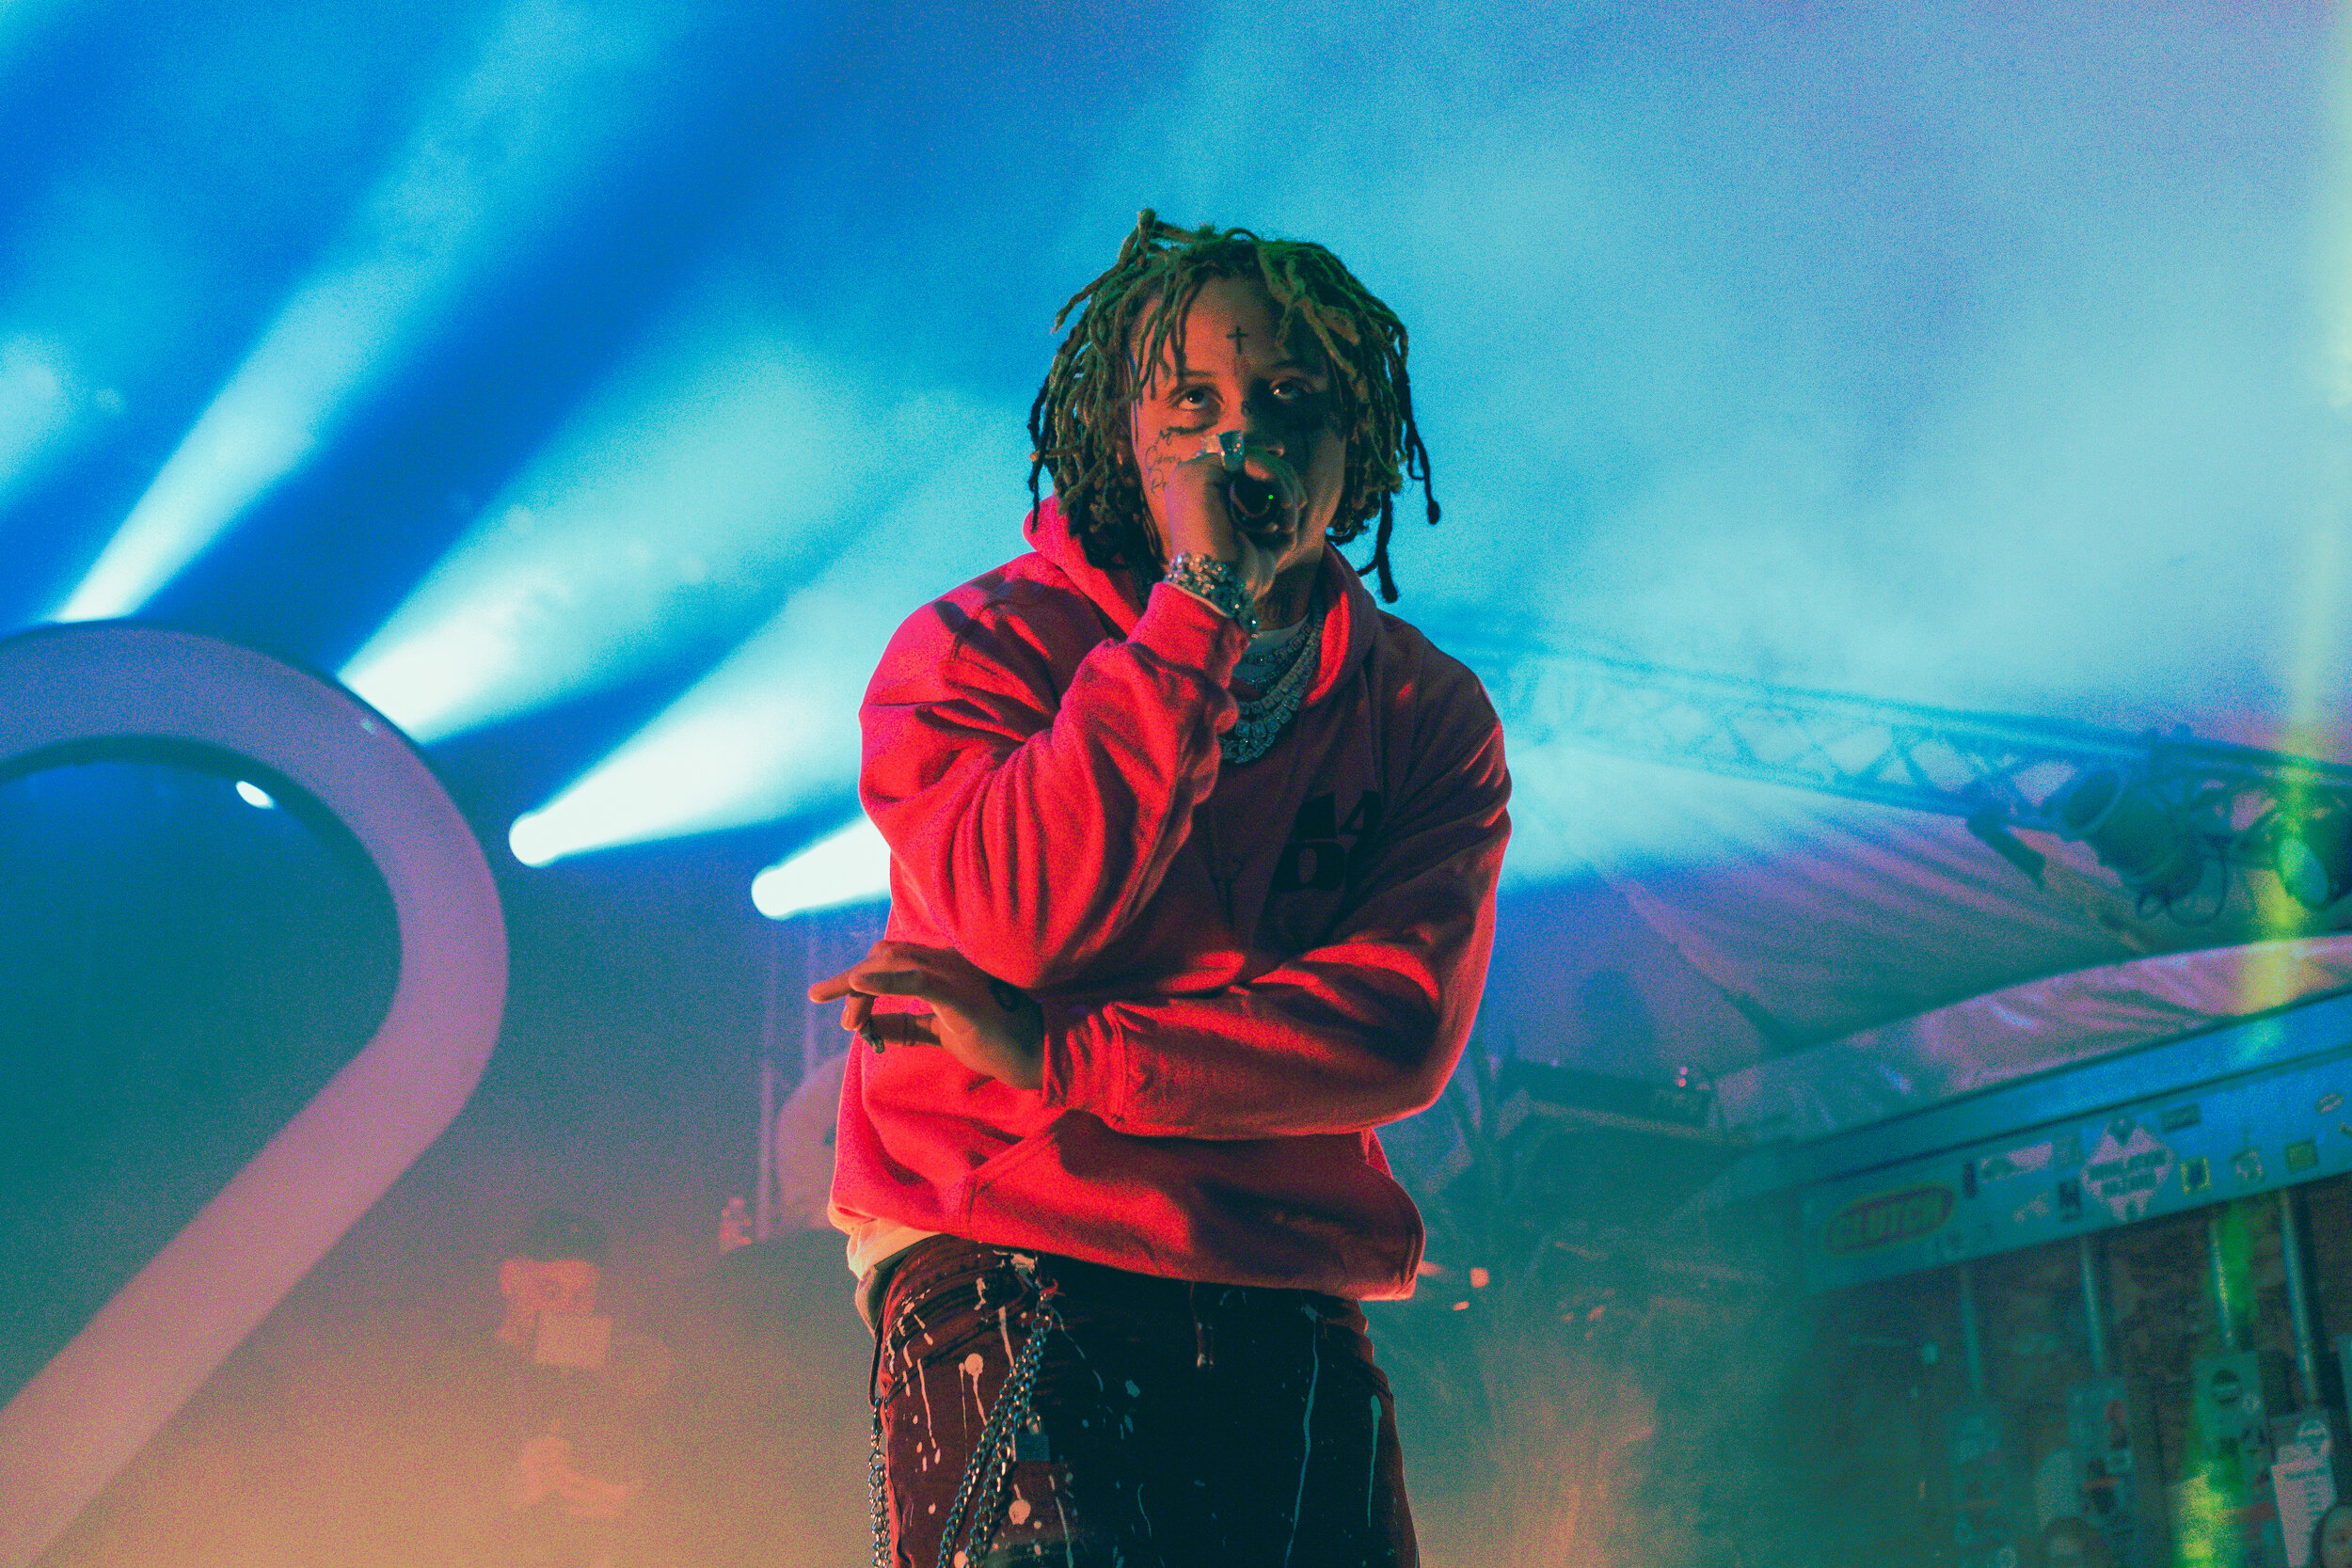  Trippie Redd takes the stage and hypes up the crowd. He is currently promoting his 4th mixtape entitled  A Love Letter to You 4,  and will head to Europe after his North American tour.   